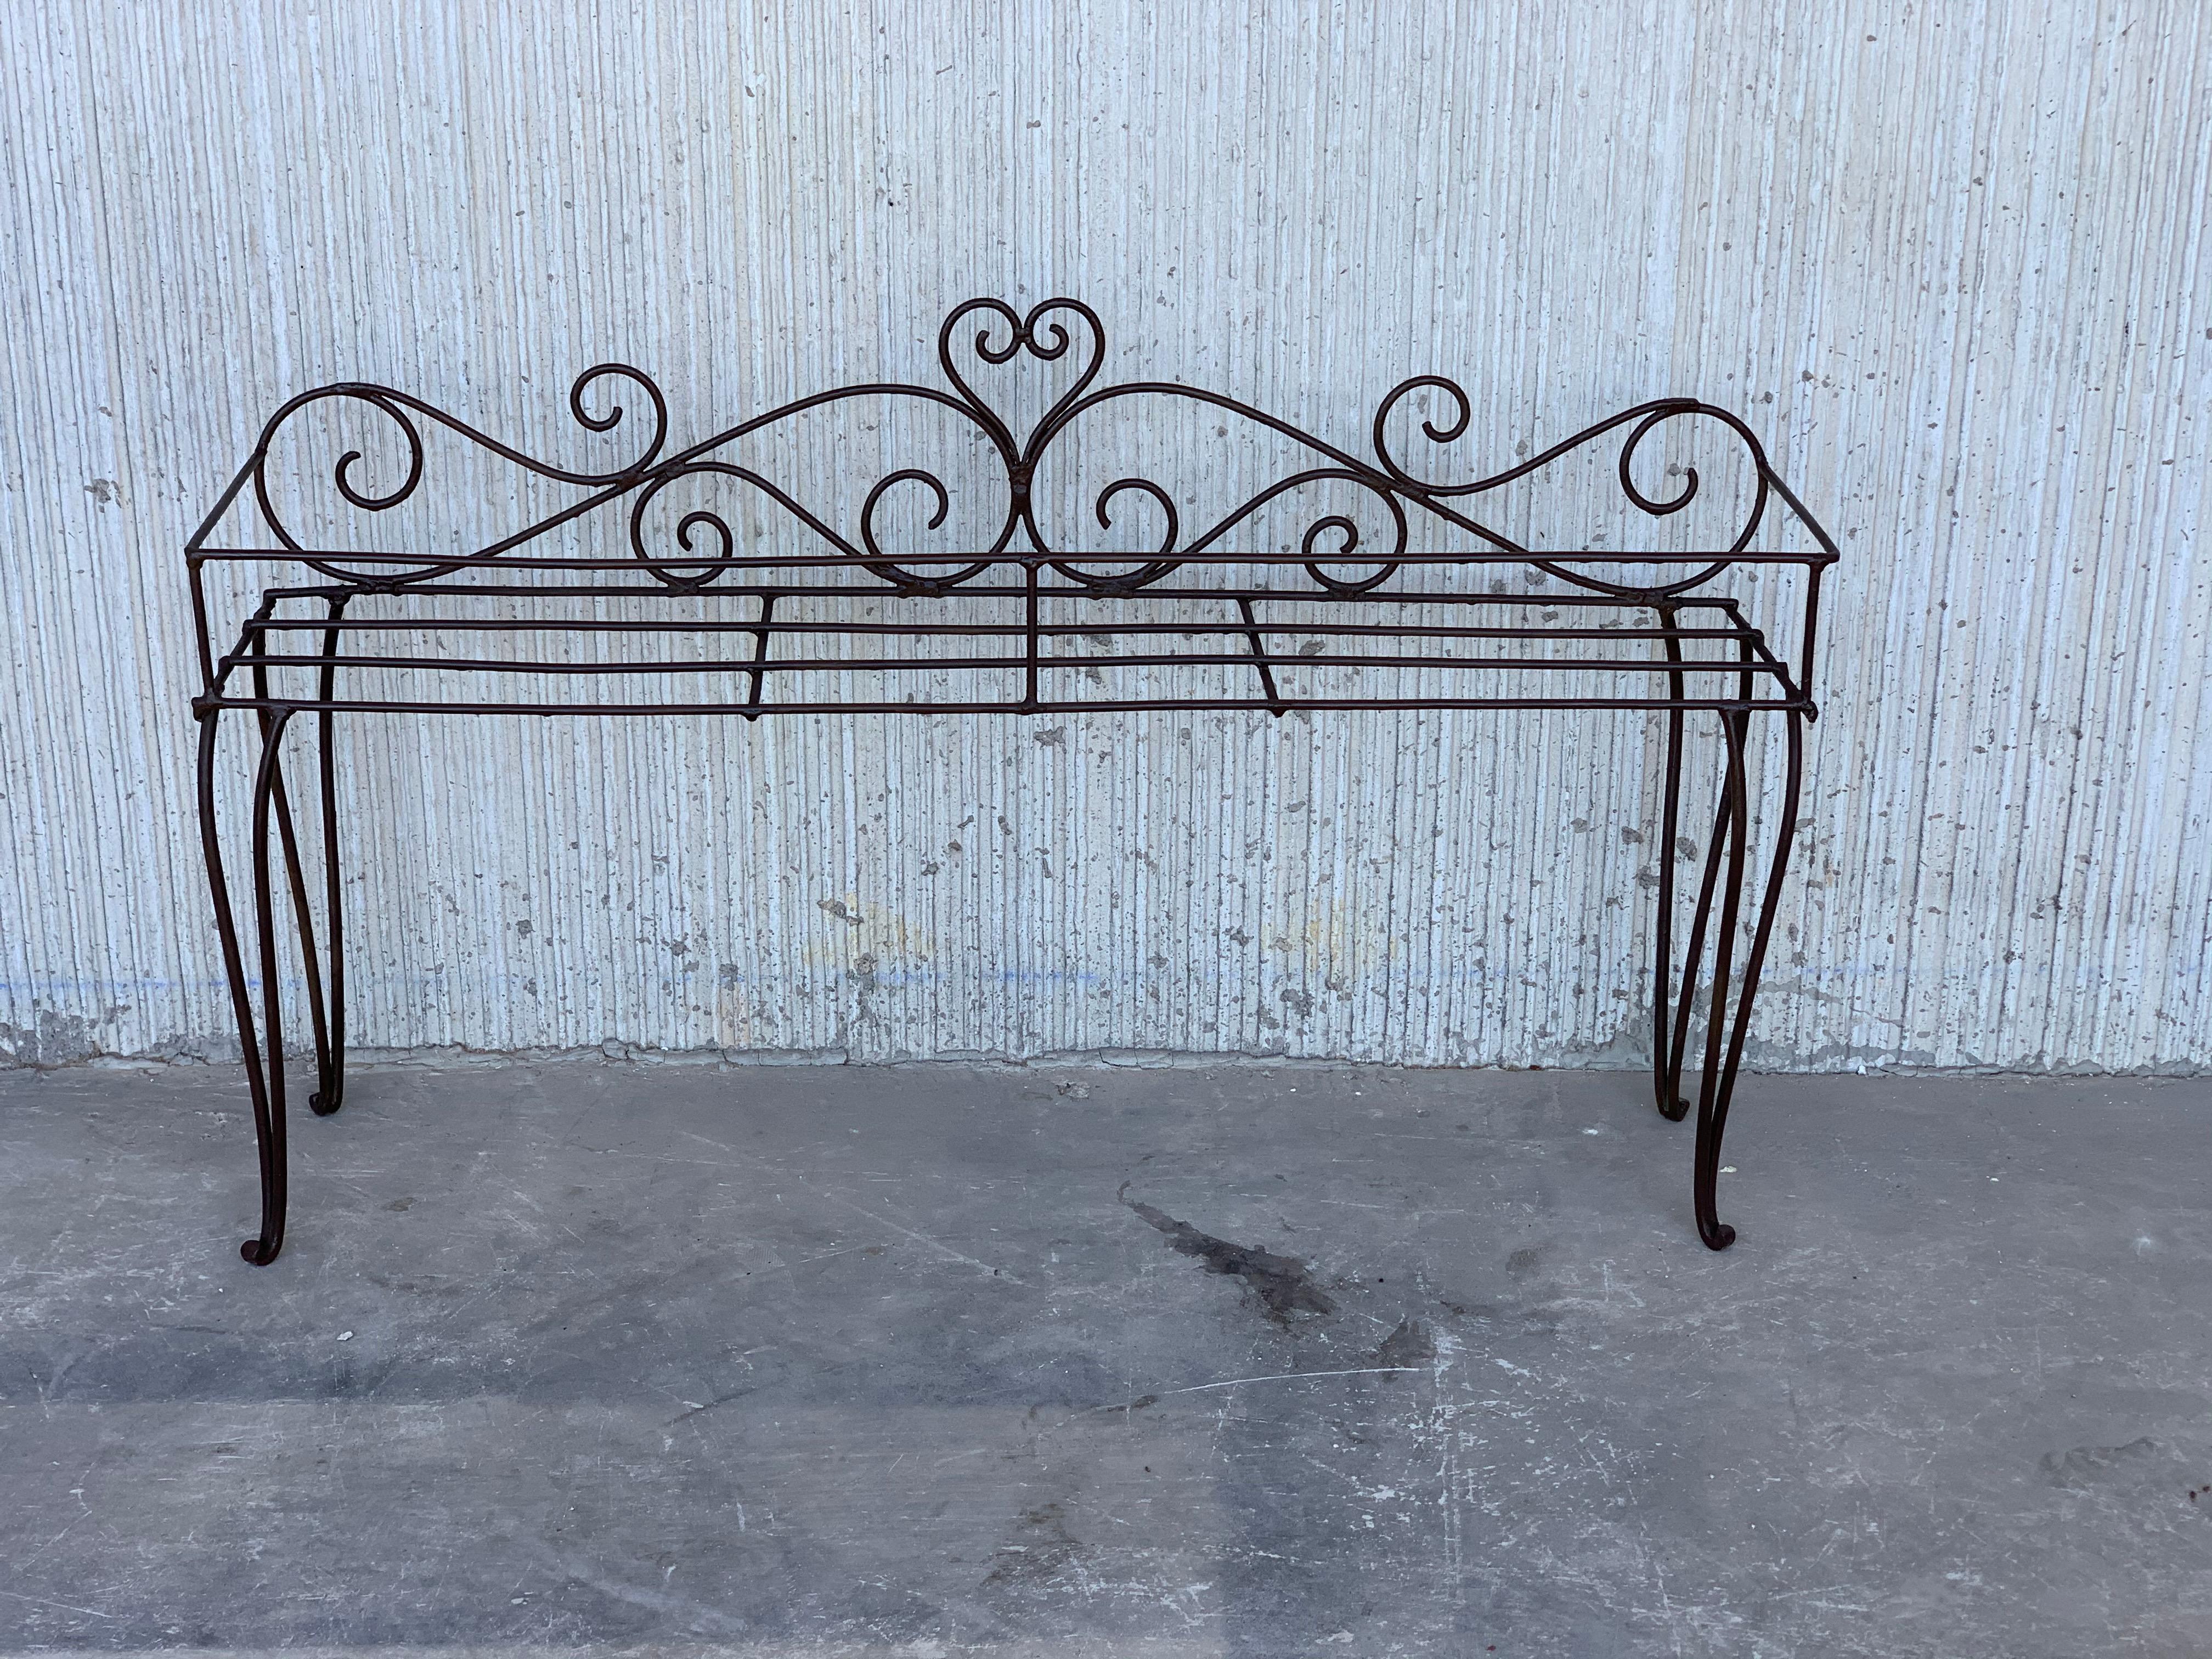 Very nice brown French antique garden planter jardinière, circa early 20th century, France. Iron metal wire frame beautifully designed and decorated with loop and scroll details. Item can be used indoors or outdoors.